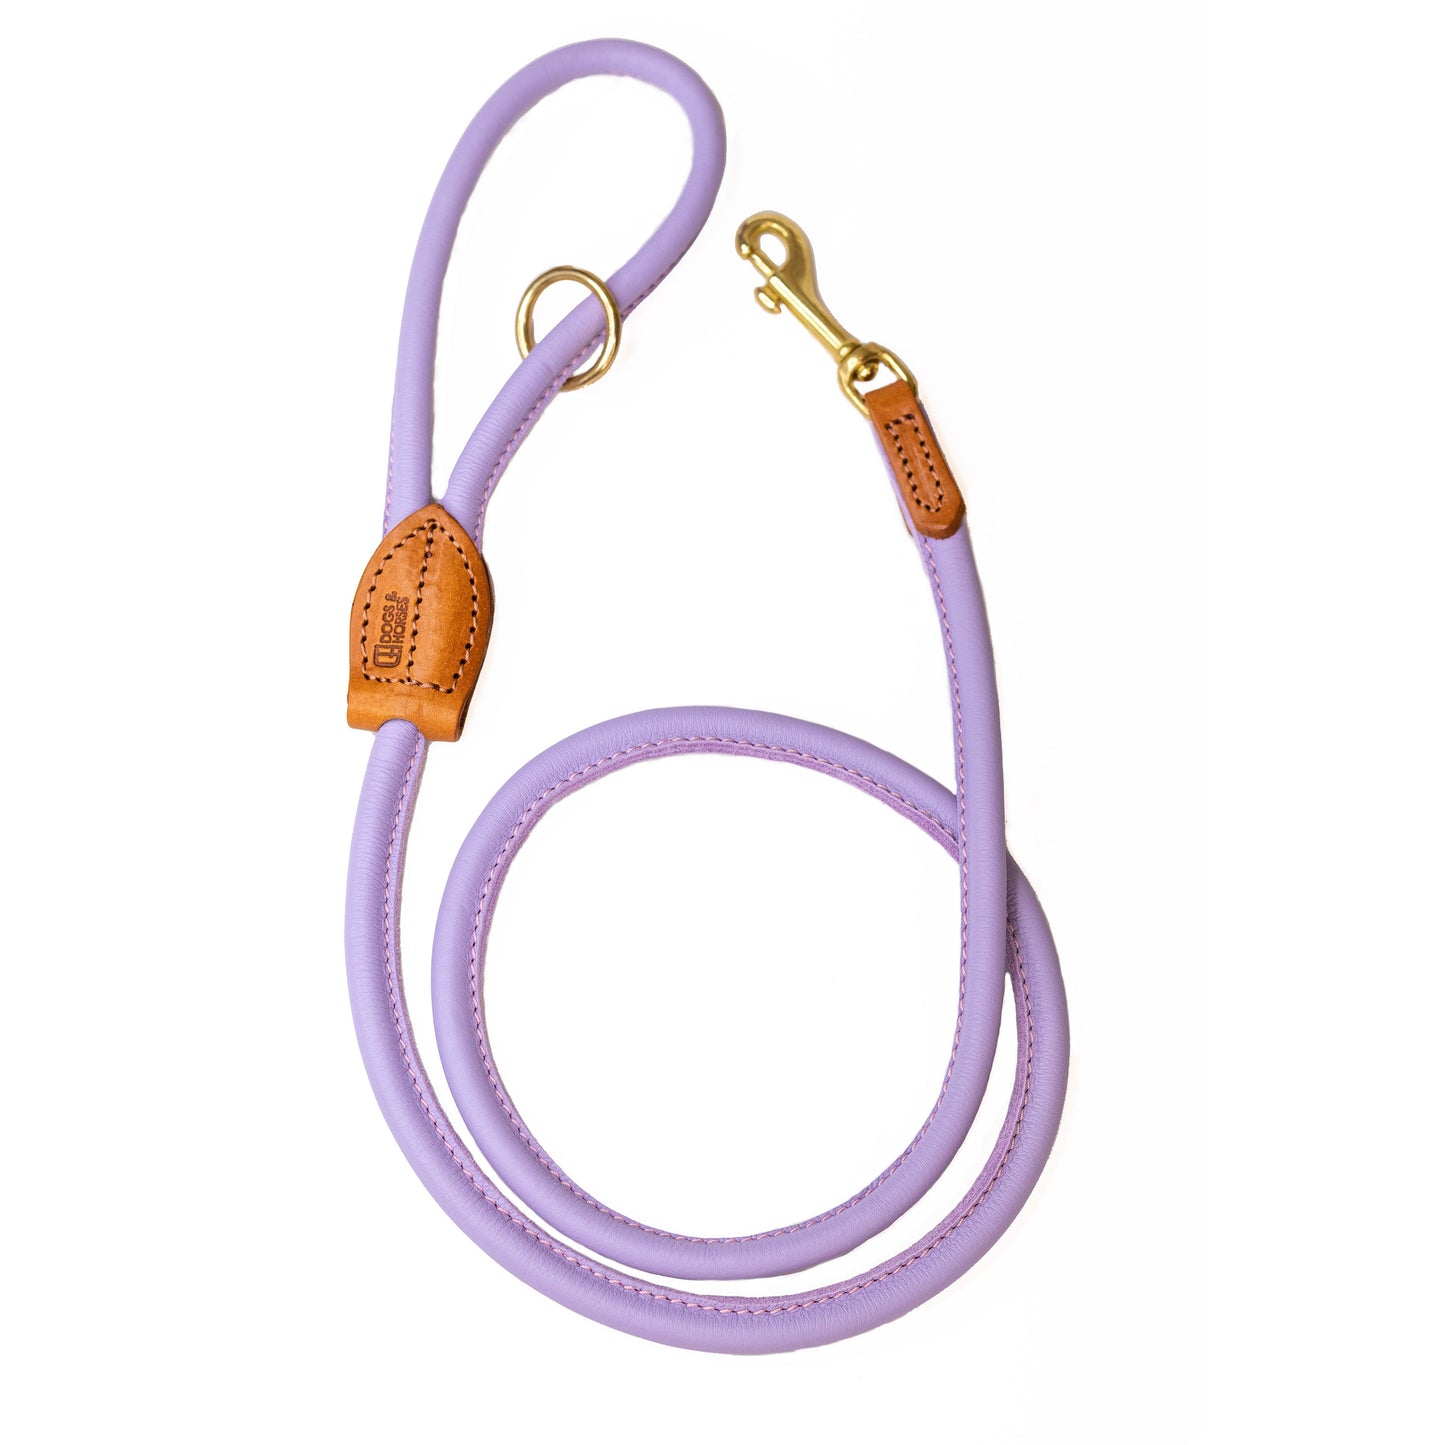 Rolled Soft Leather Dog Lead Lilac